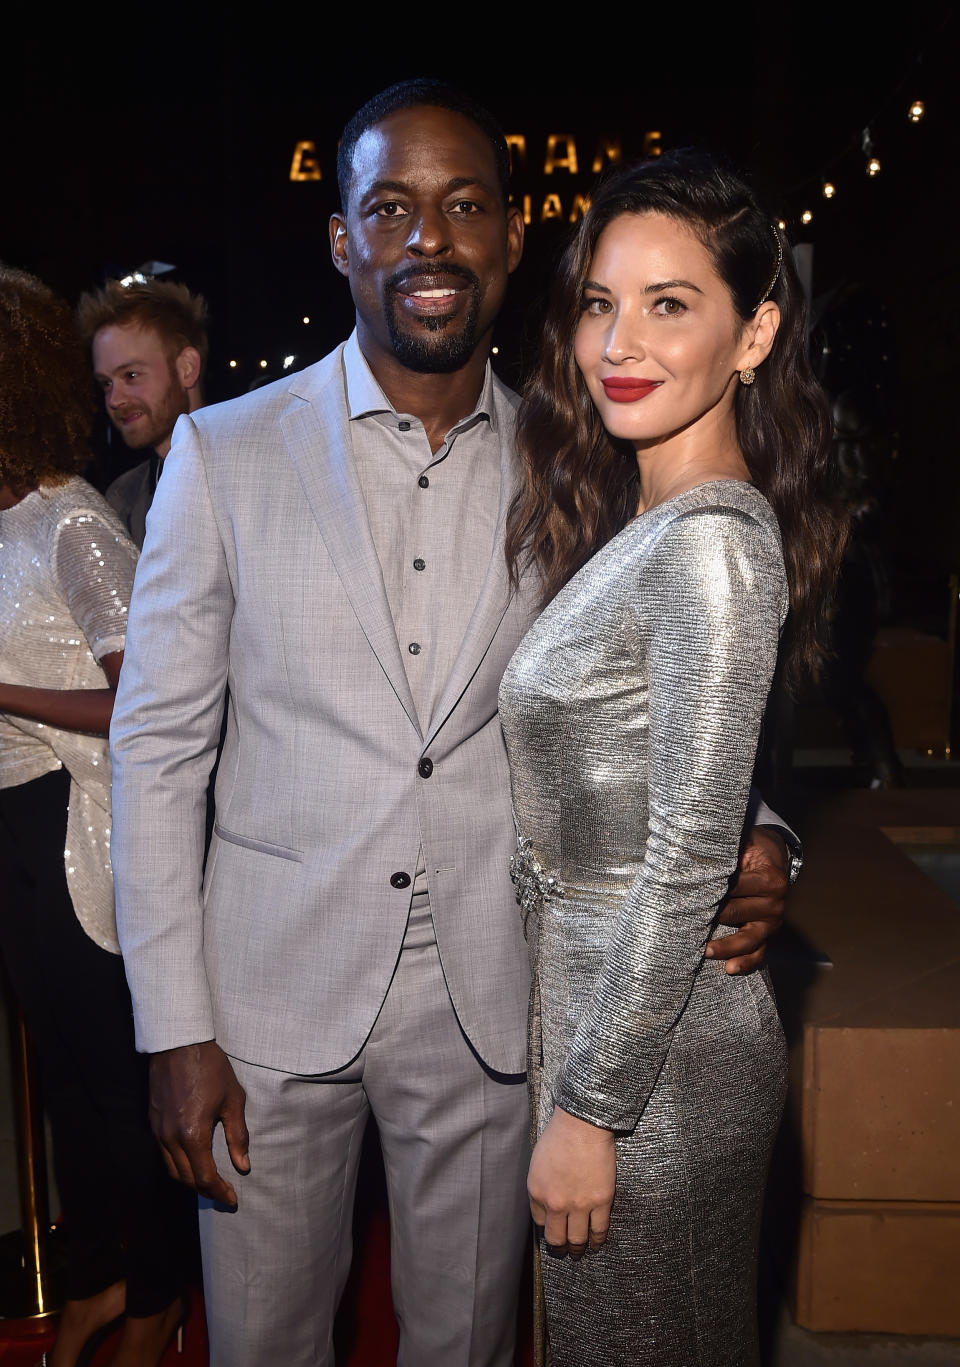 Sterling K. Brown and Olivia Munn attend at the L.A. premiere of<em> The Predato</em>r. (Photo: Getty Images)